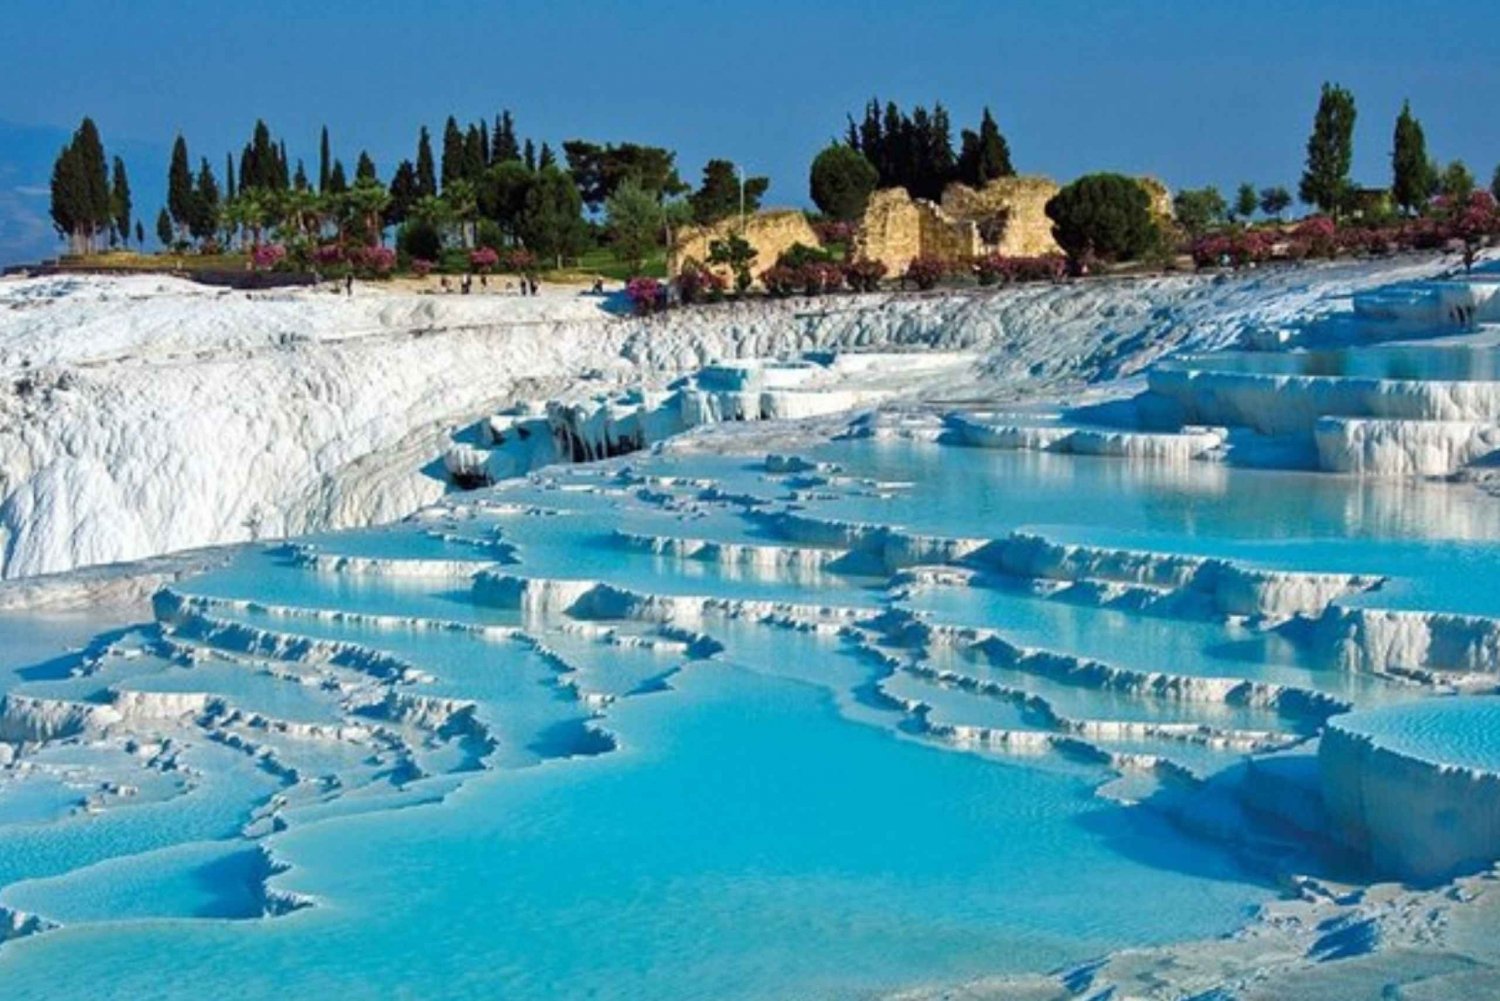 From Bodrum: Full-Day Pamukkale Day Trip with Lunch